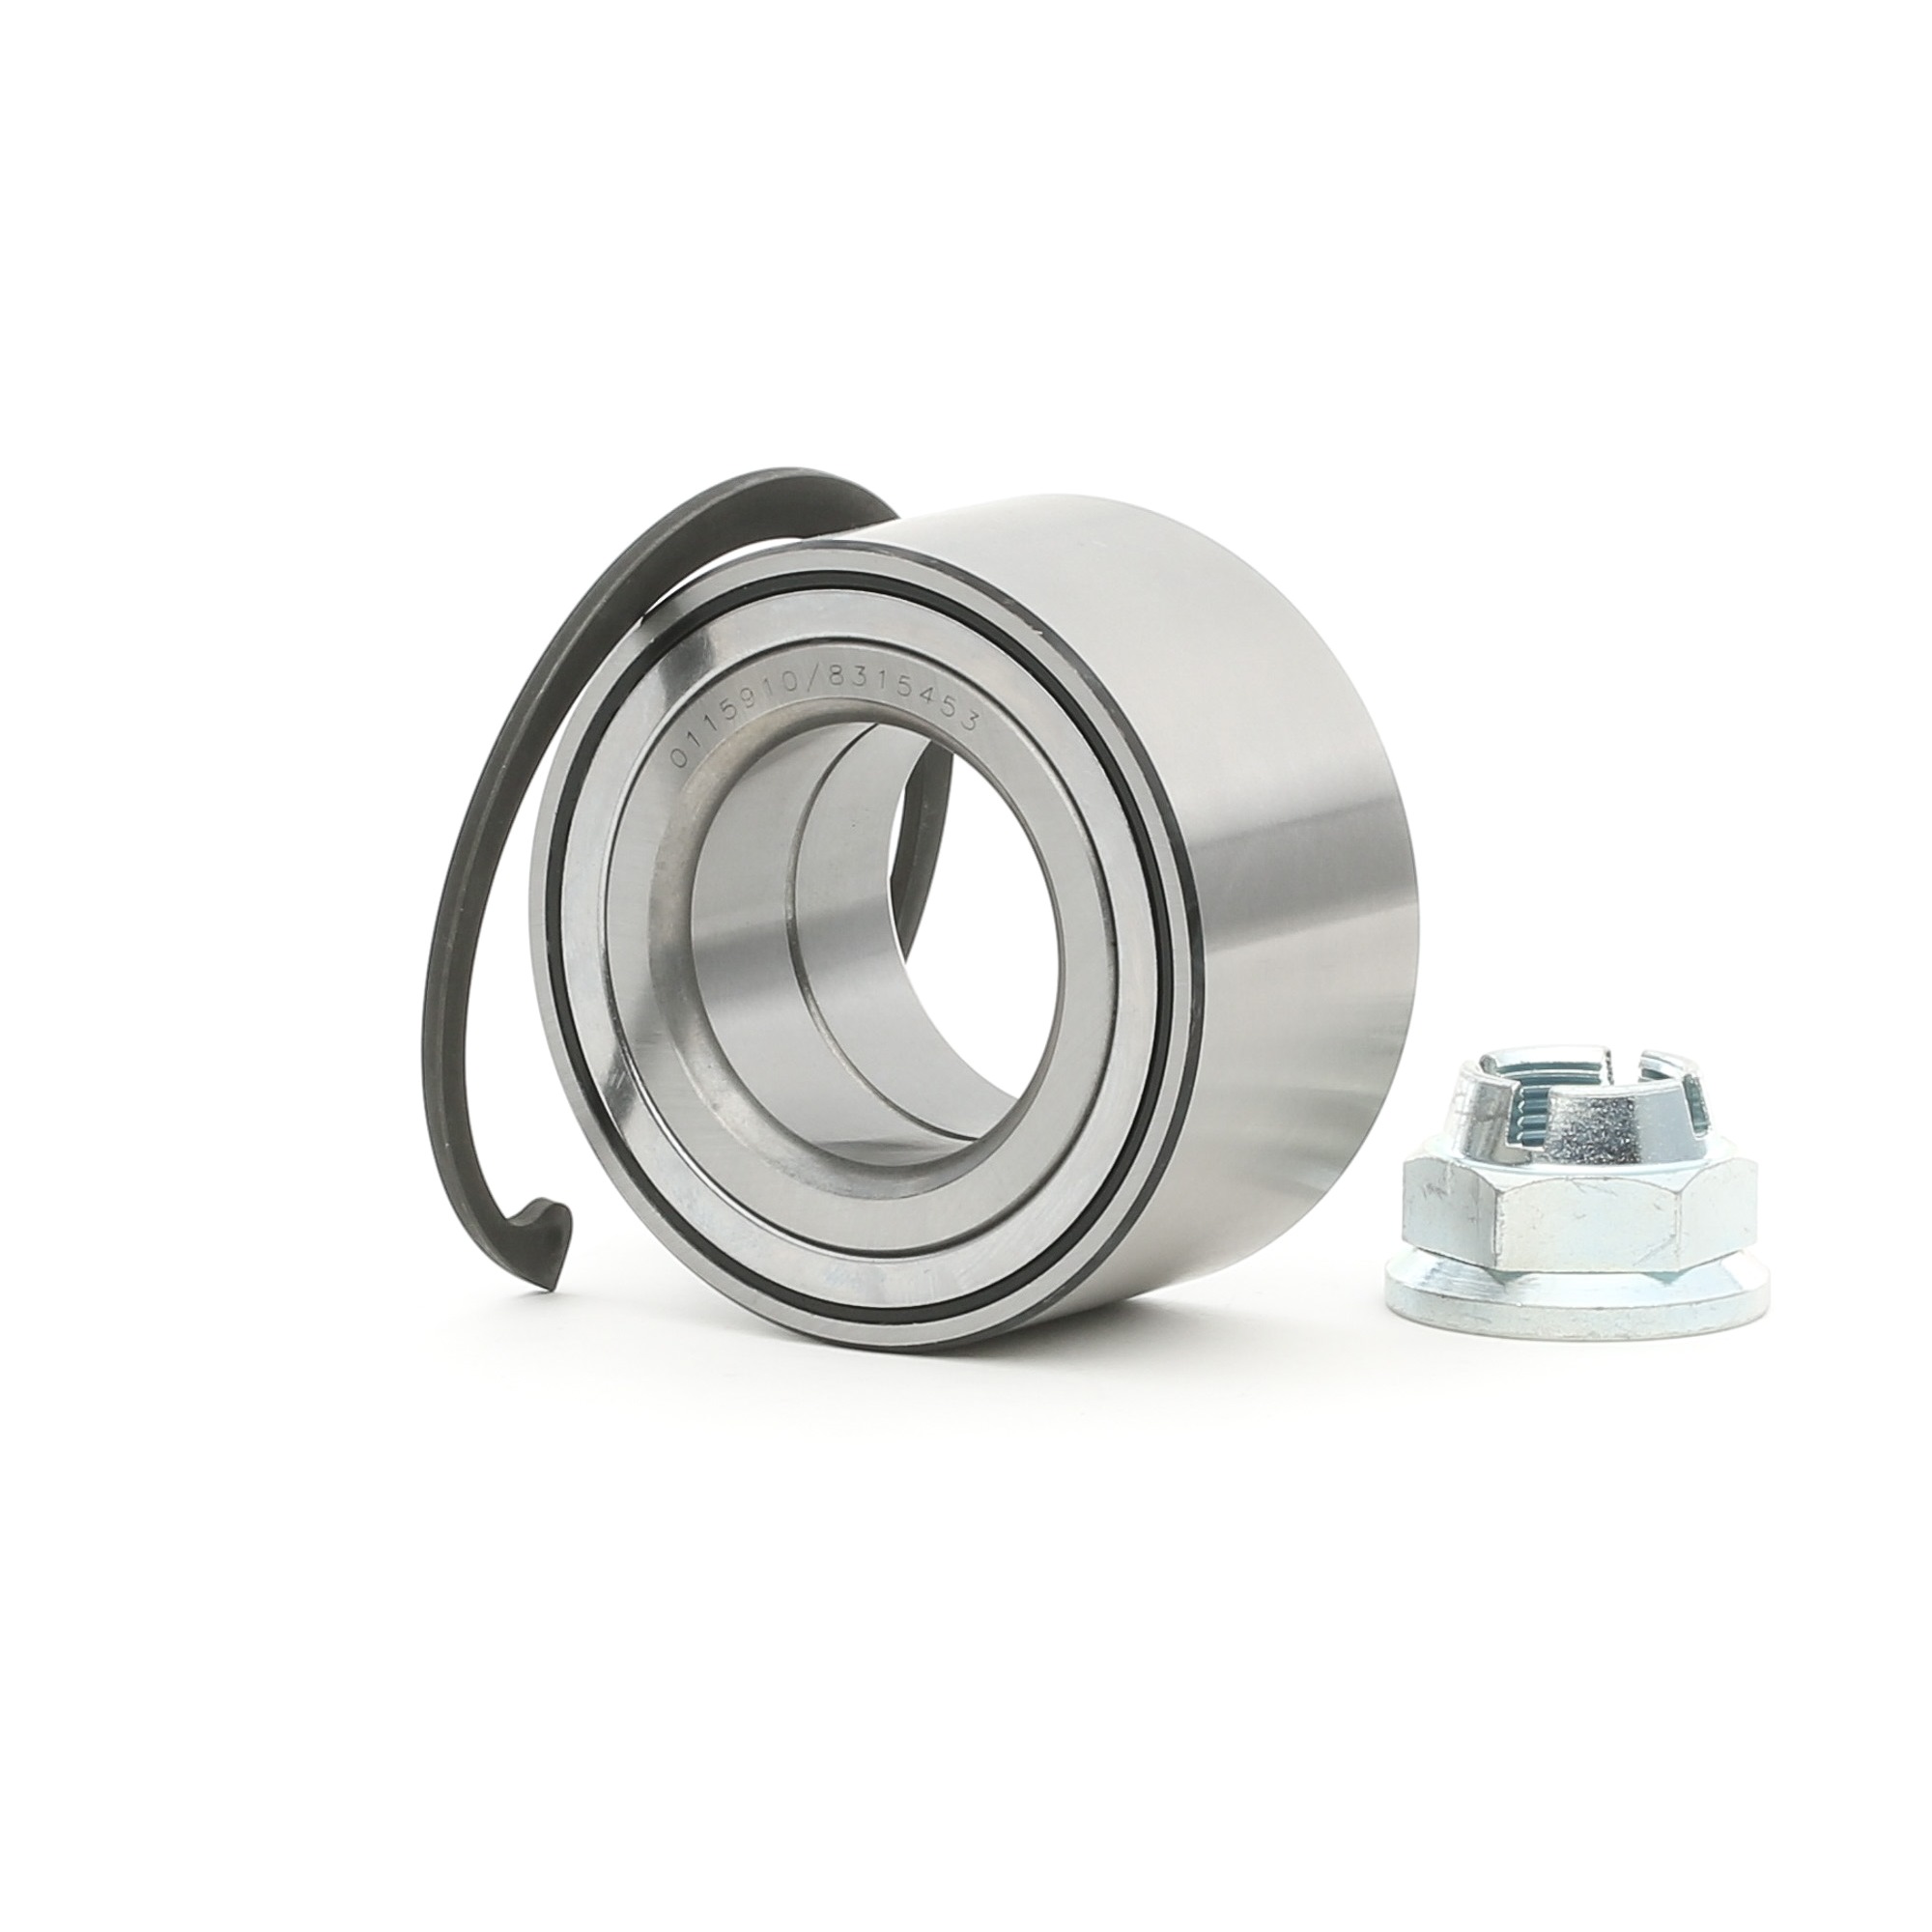 STARK SKWB-0180819 Wheel bearing kit Rear Axle both sides, with integrated ABS sensor, 77 mm